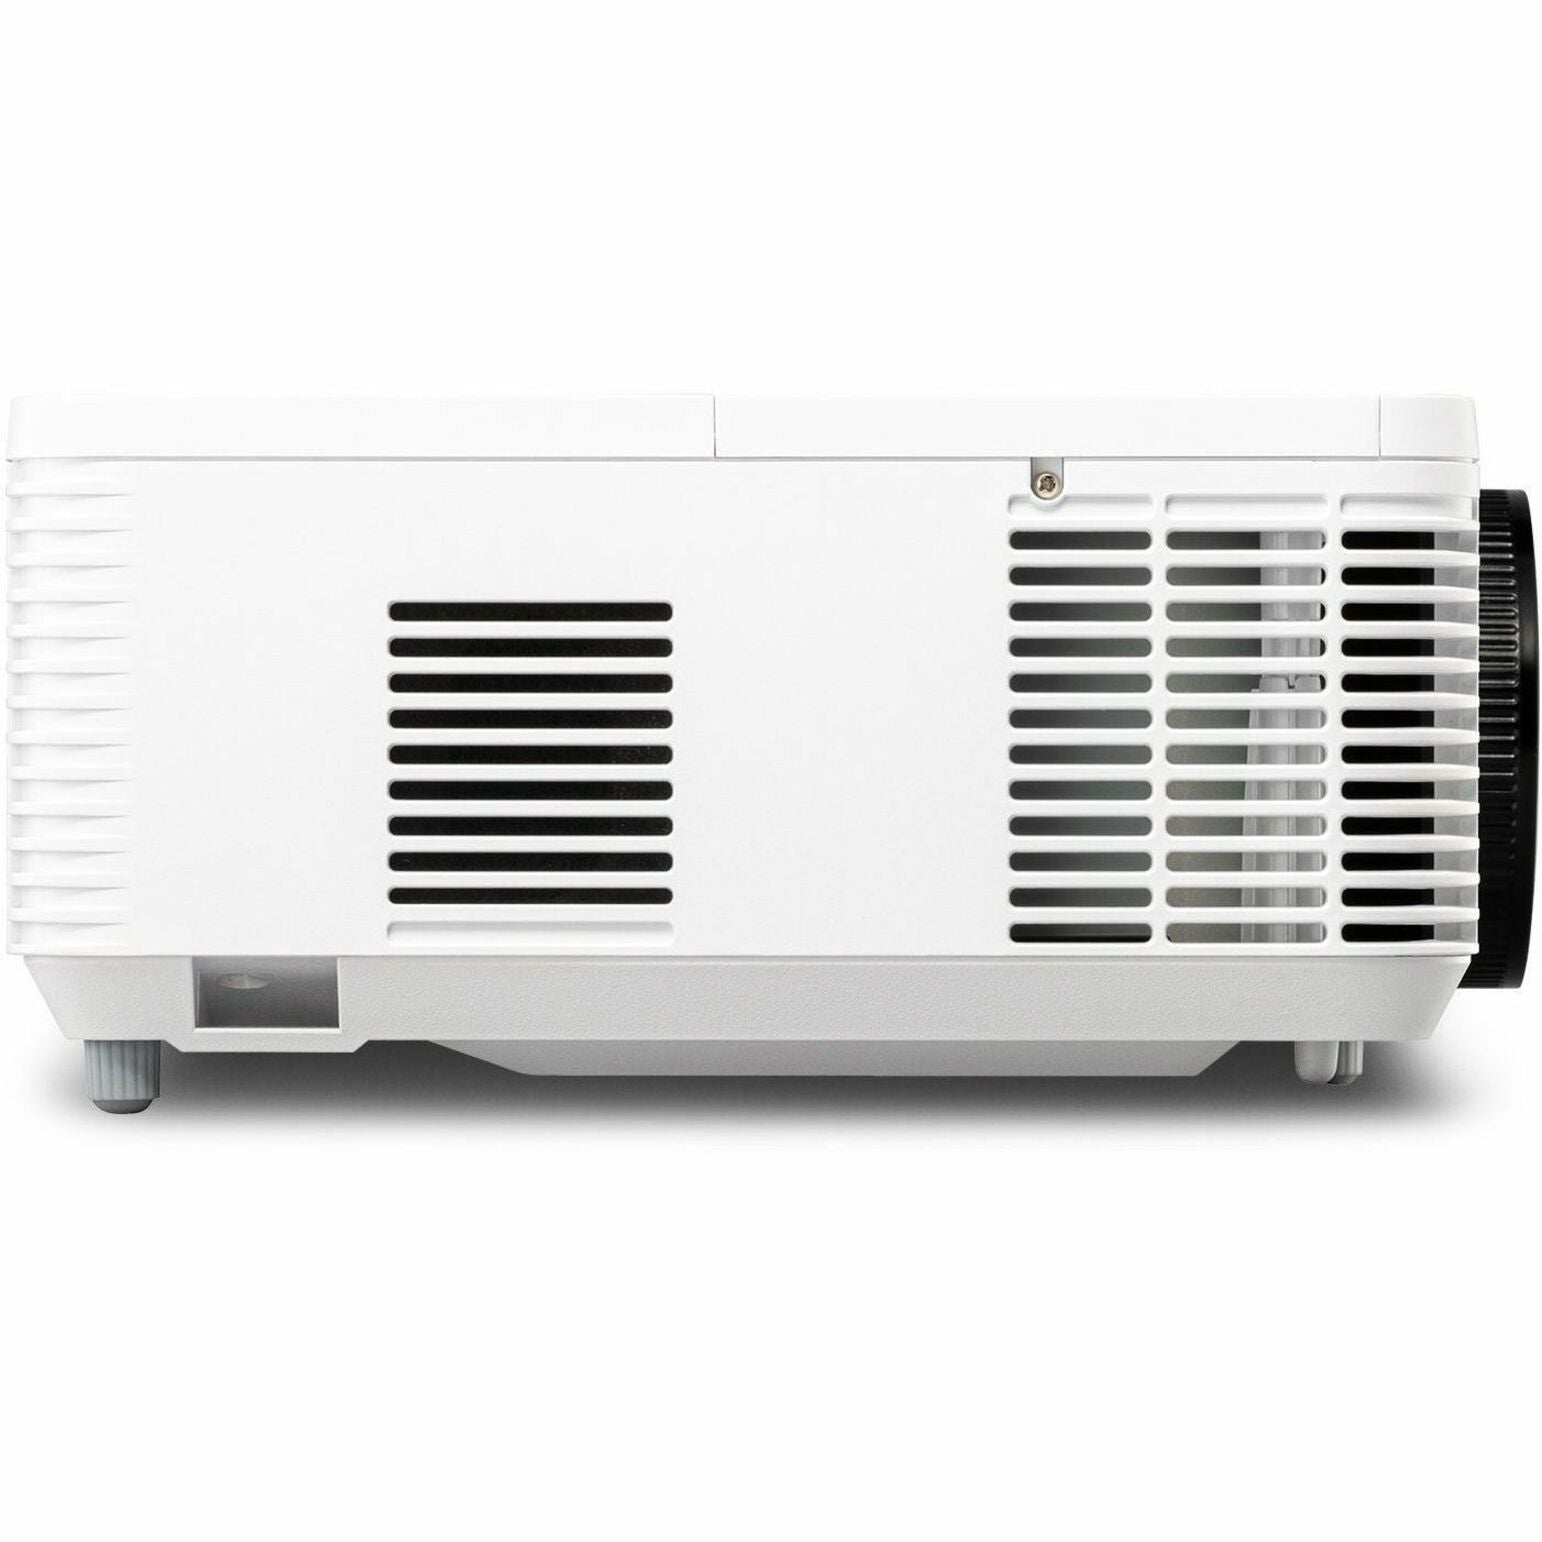 ViewSonic PA503HD 4,000 ANSI Lumens 1080p Home & Business Projector, Short Throw, Full HD, 16:9